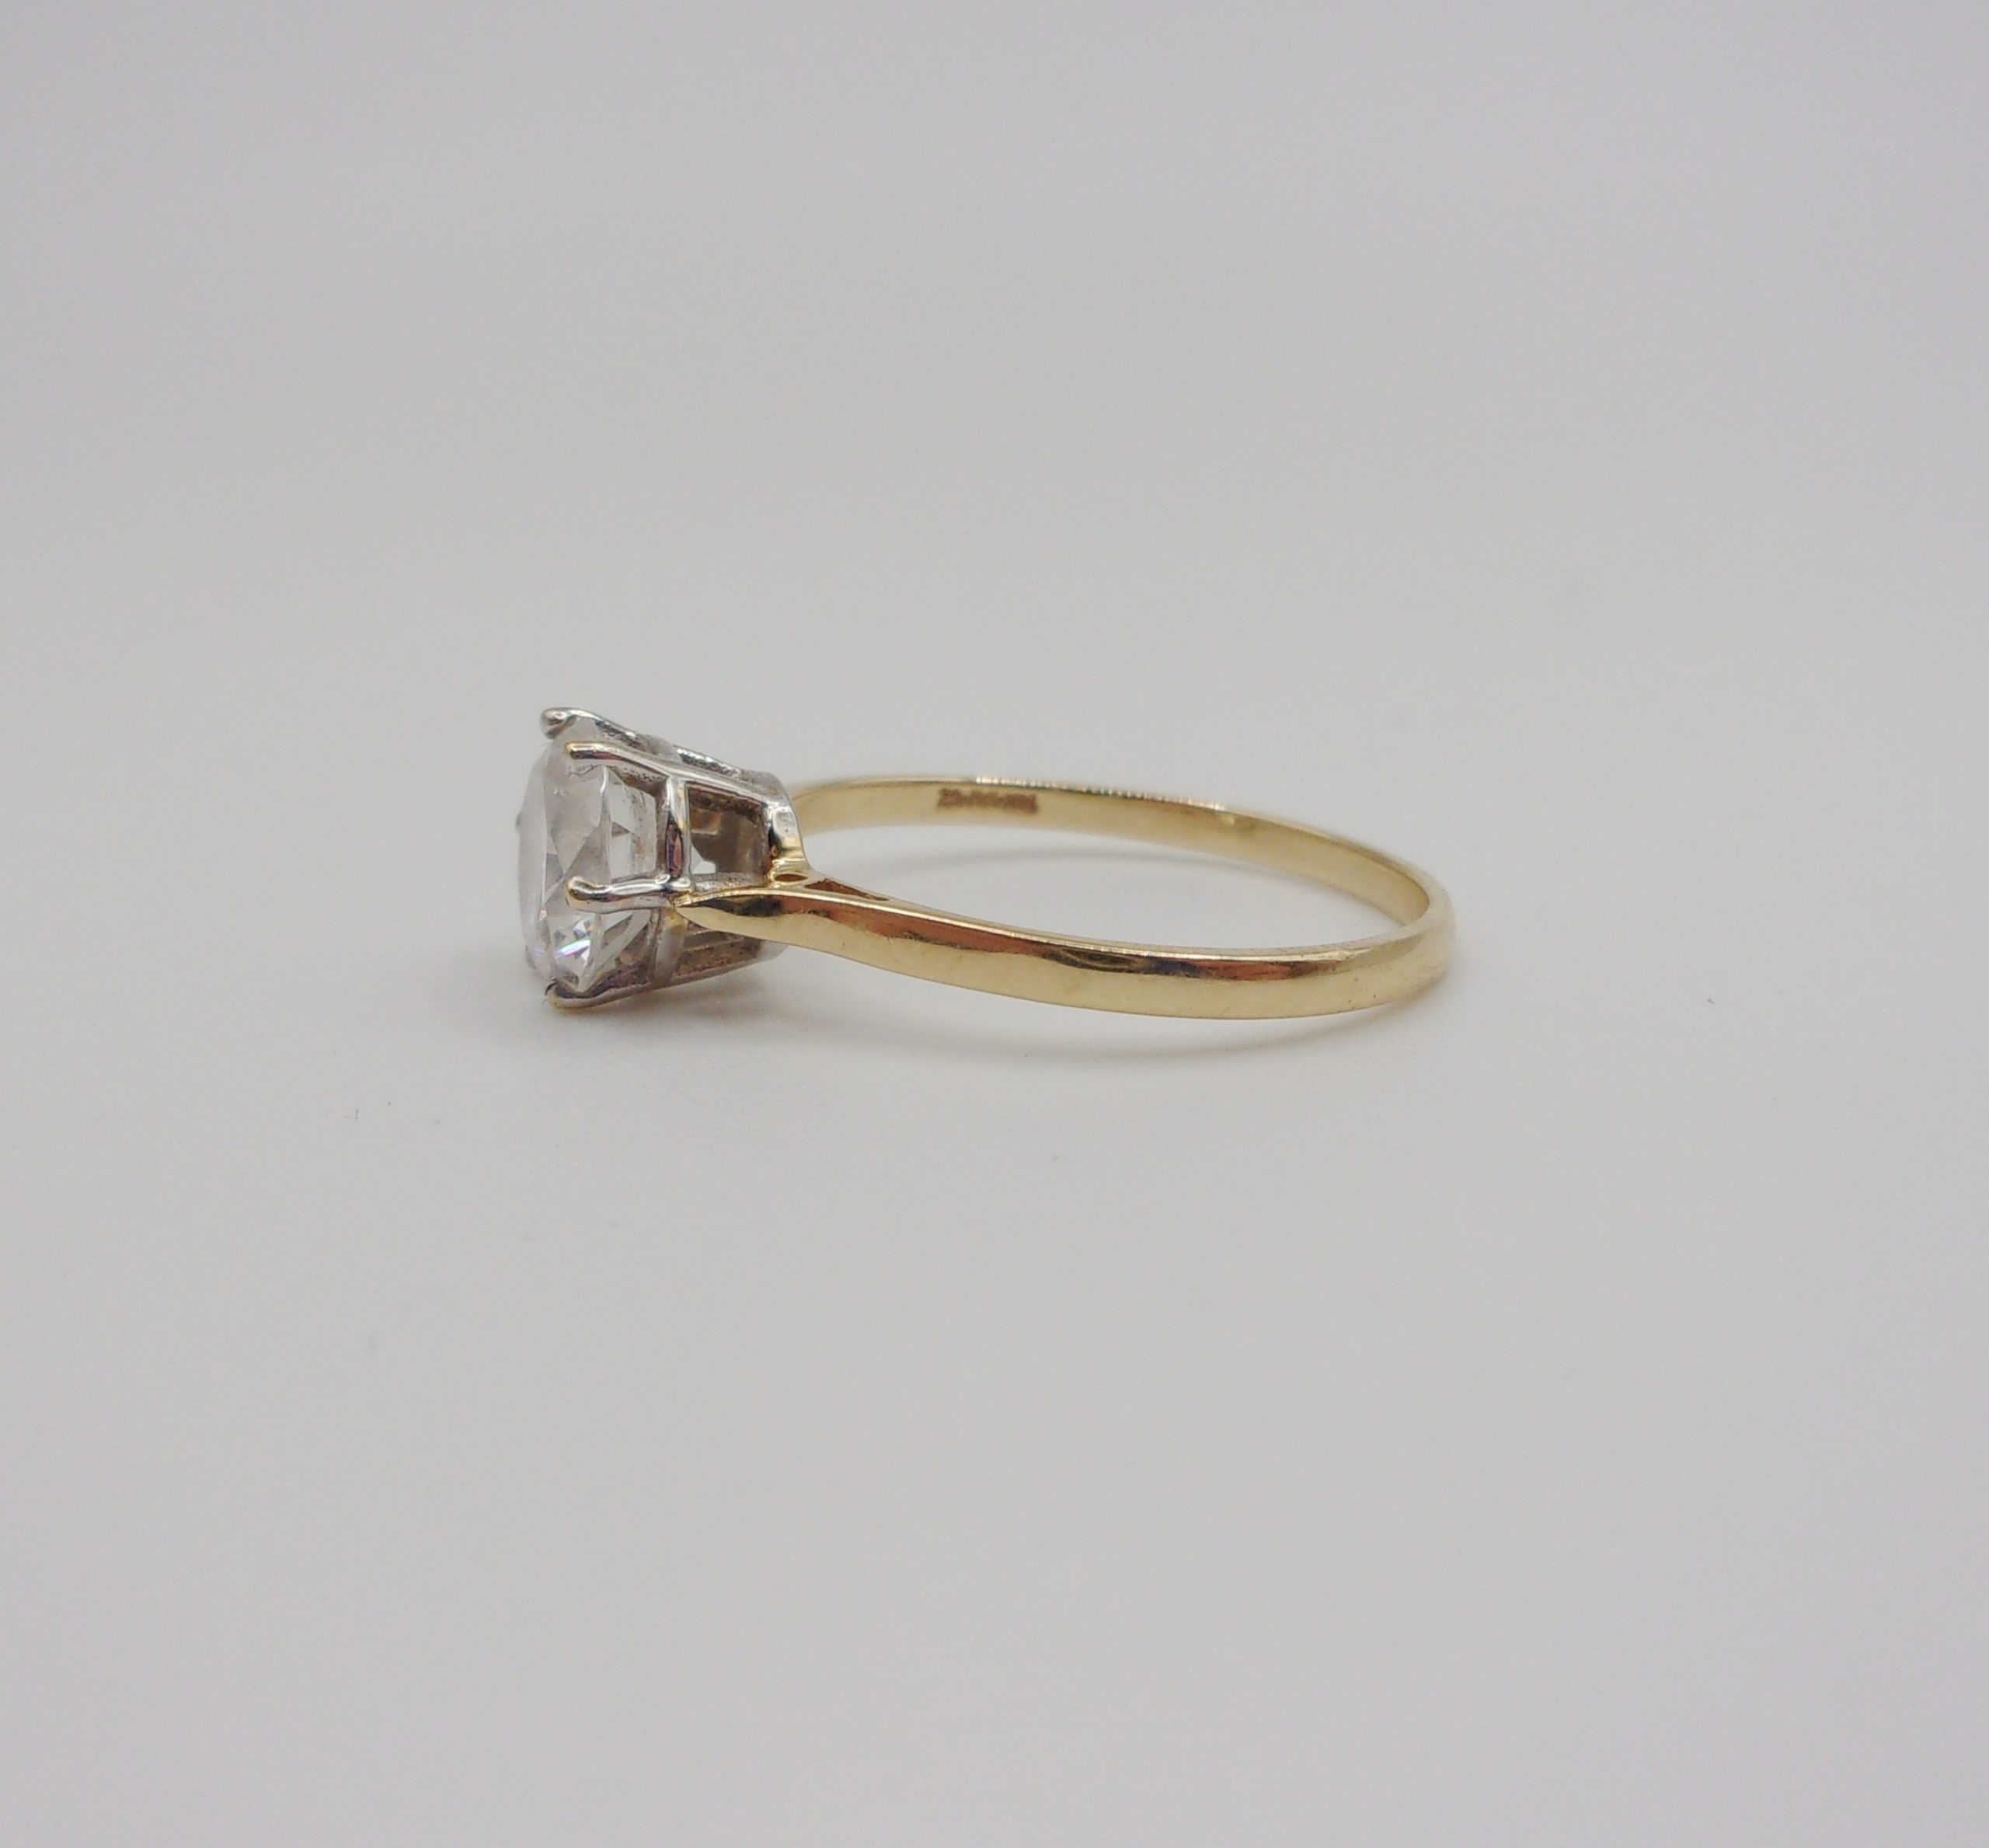 14ct Yellow Gold Cubic Zirconia Solitaire Ring UK Size N US 6 ½ ...